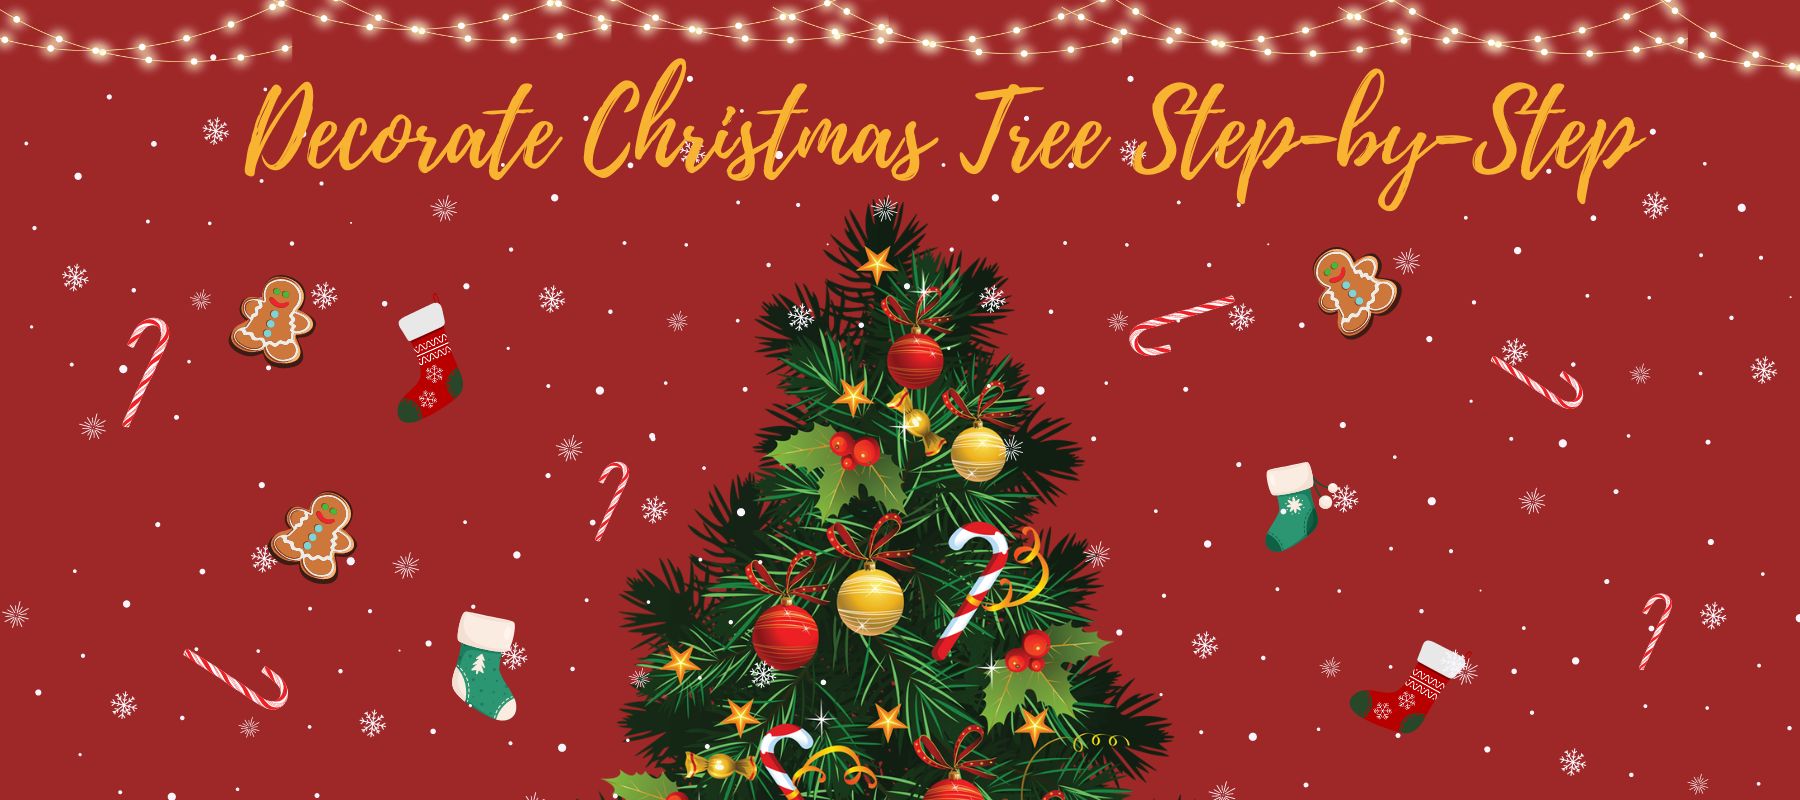 How-to-decorate-christmas-tree-steps-by-steps